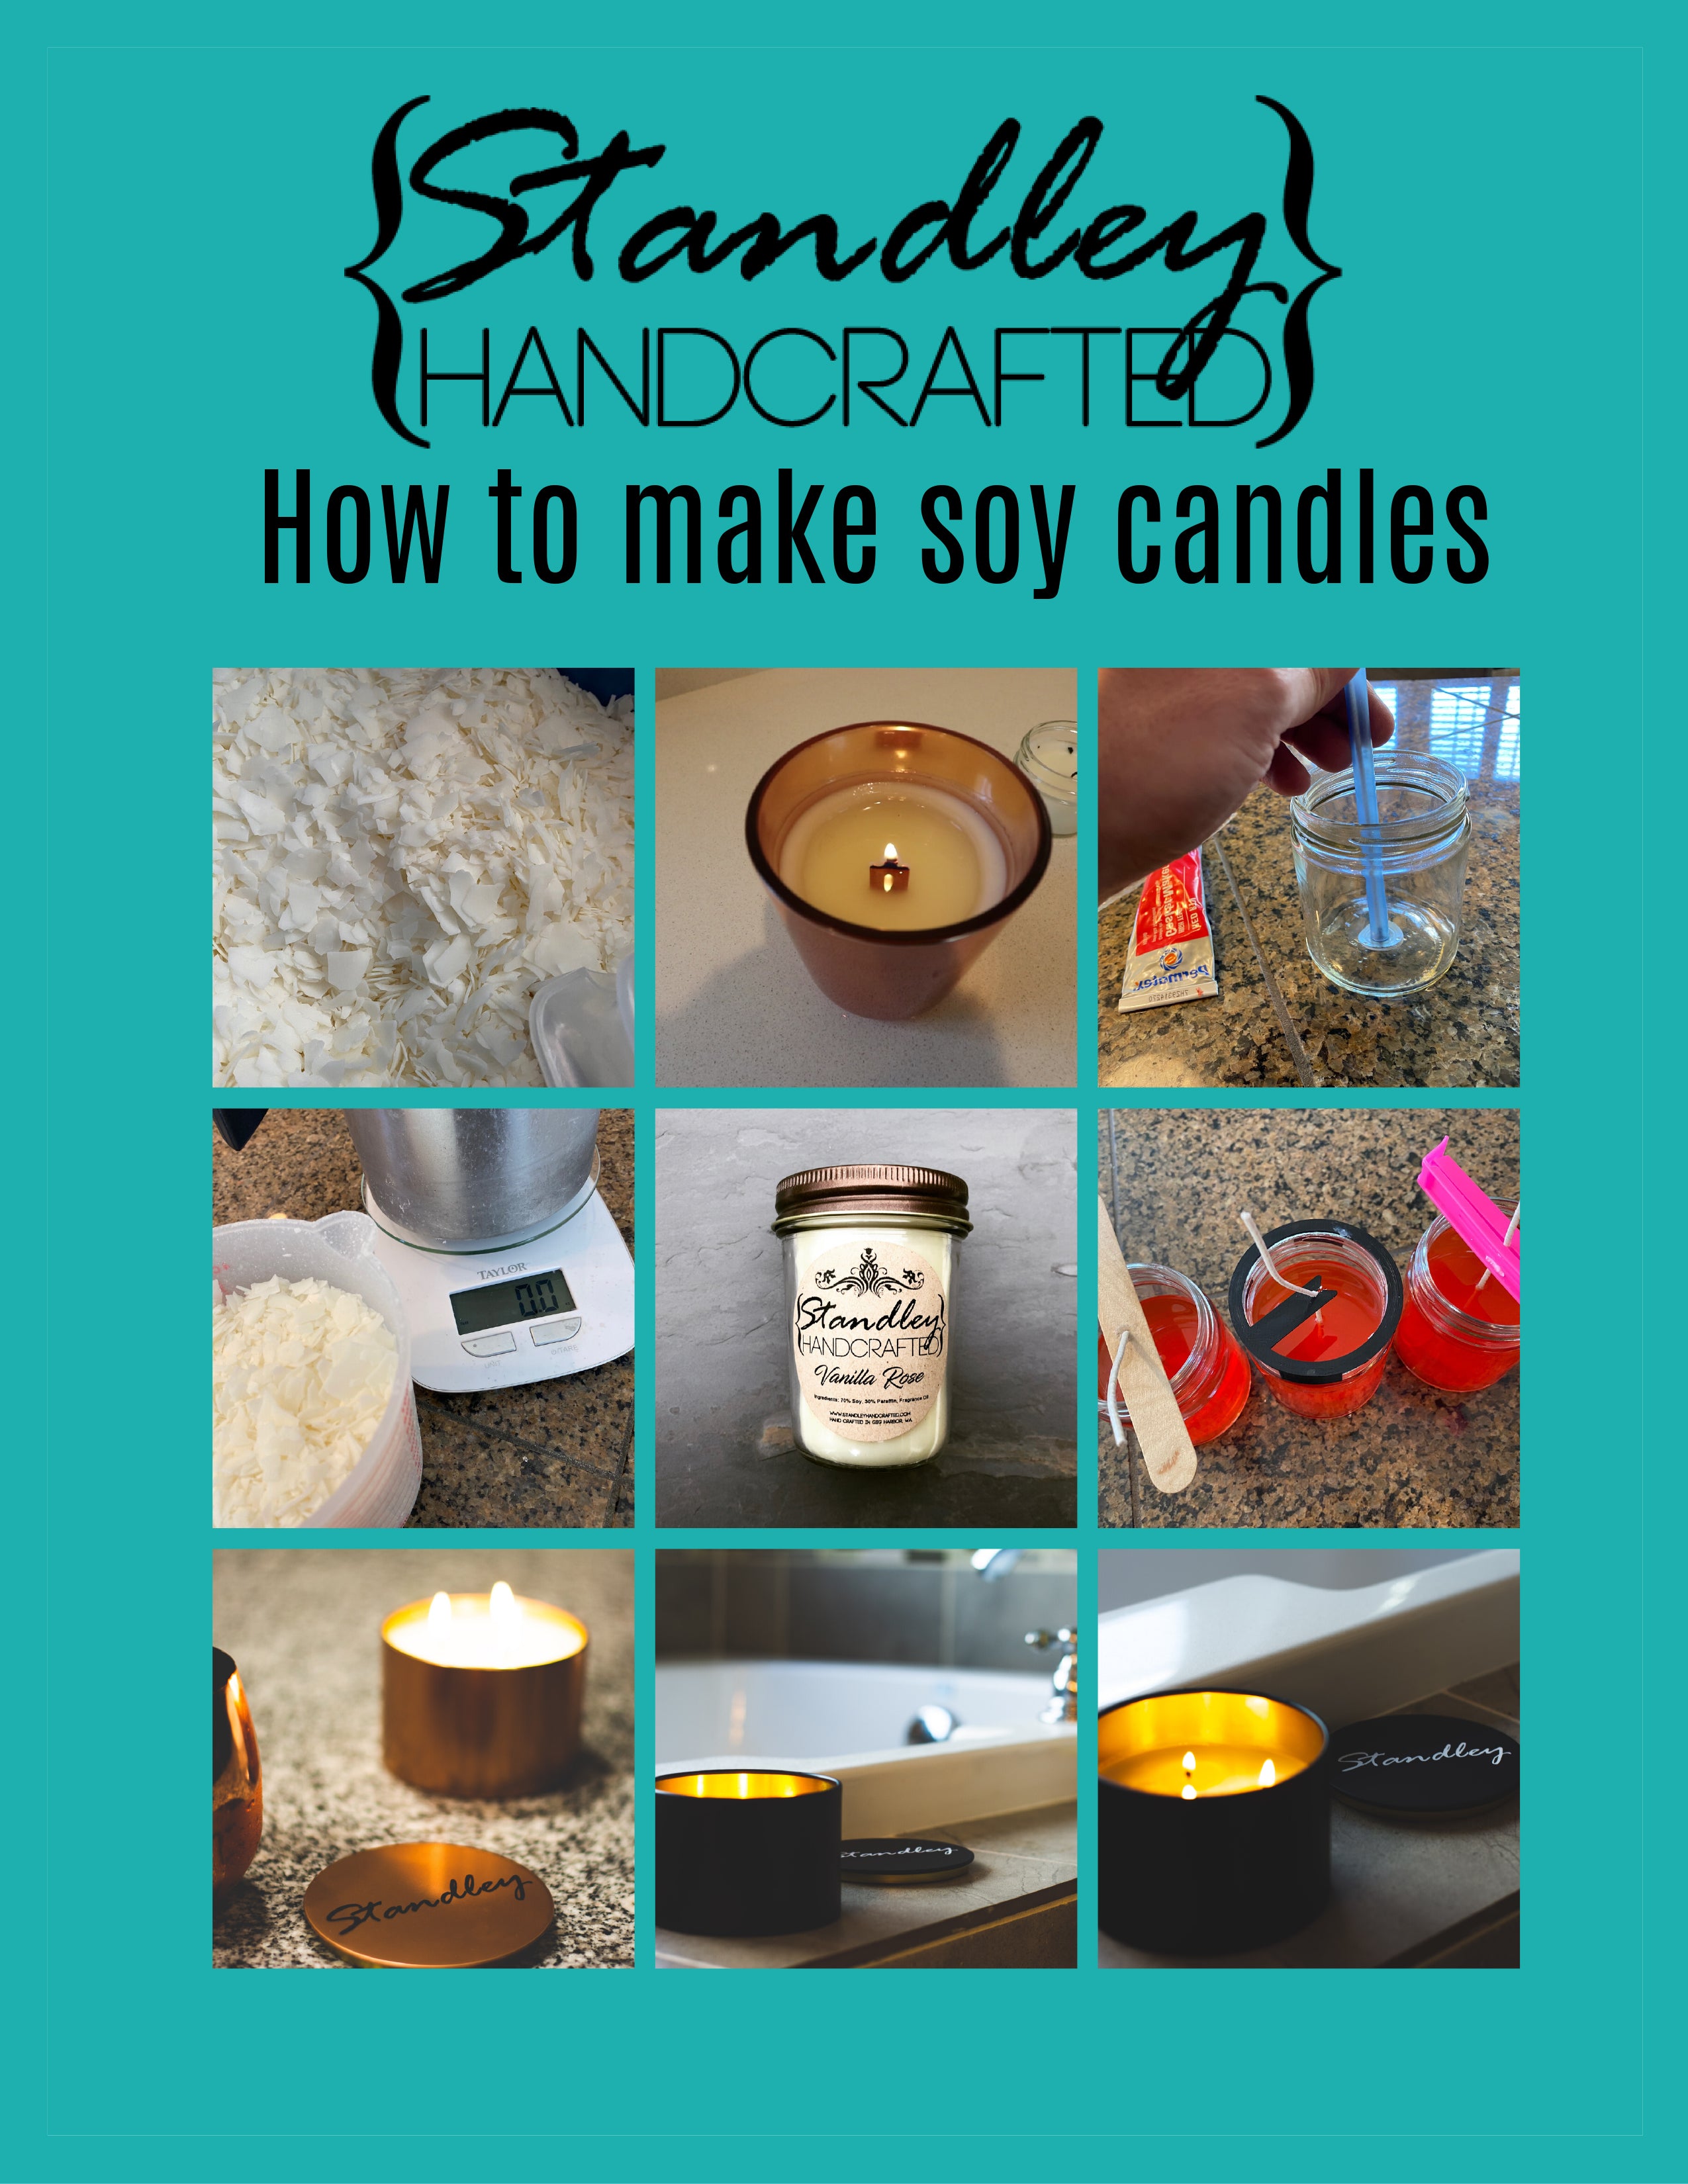 How to Melt Soy Wax for Candle Making - Learn How To Make Soy Candles at  Home